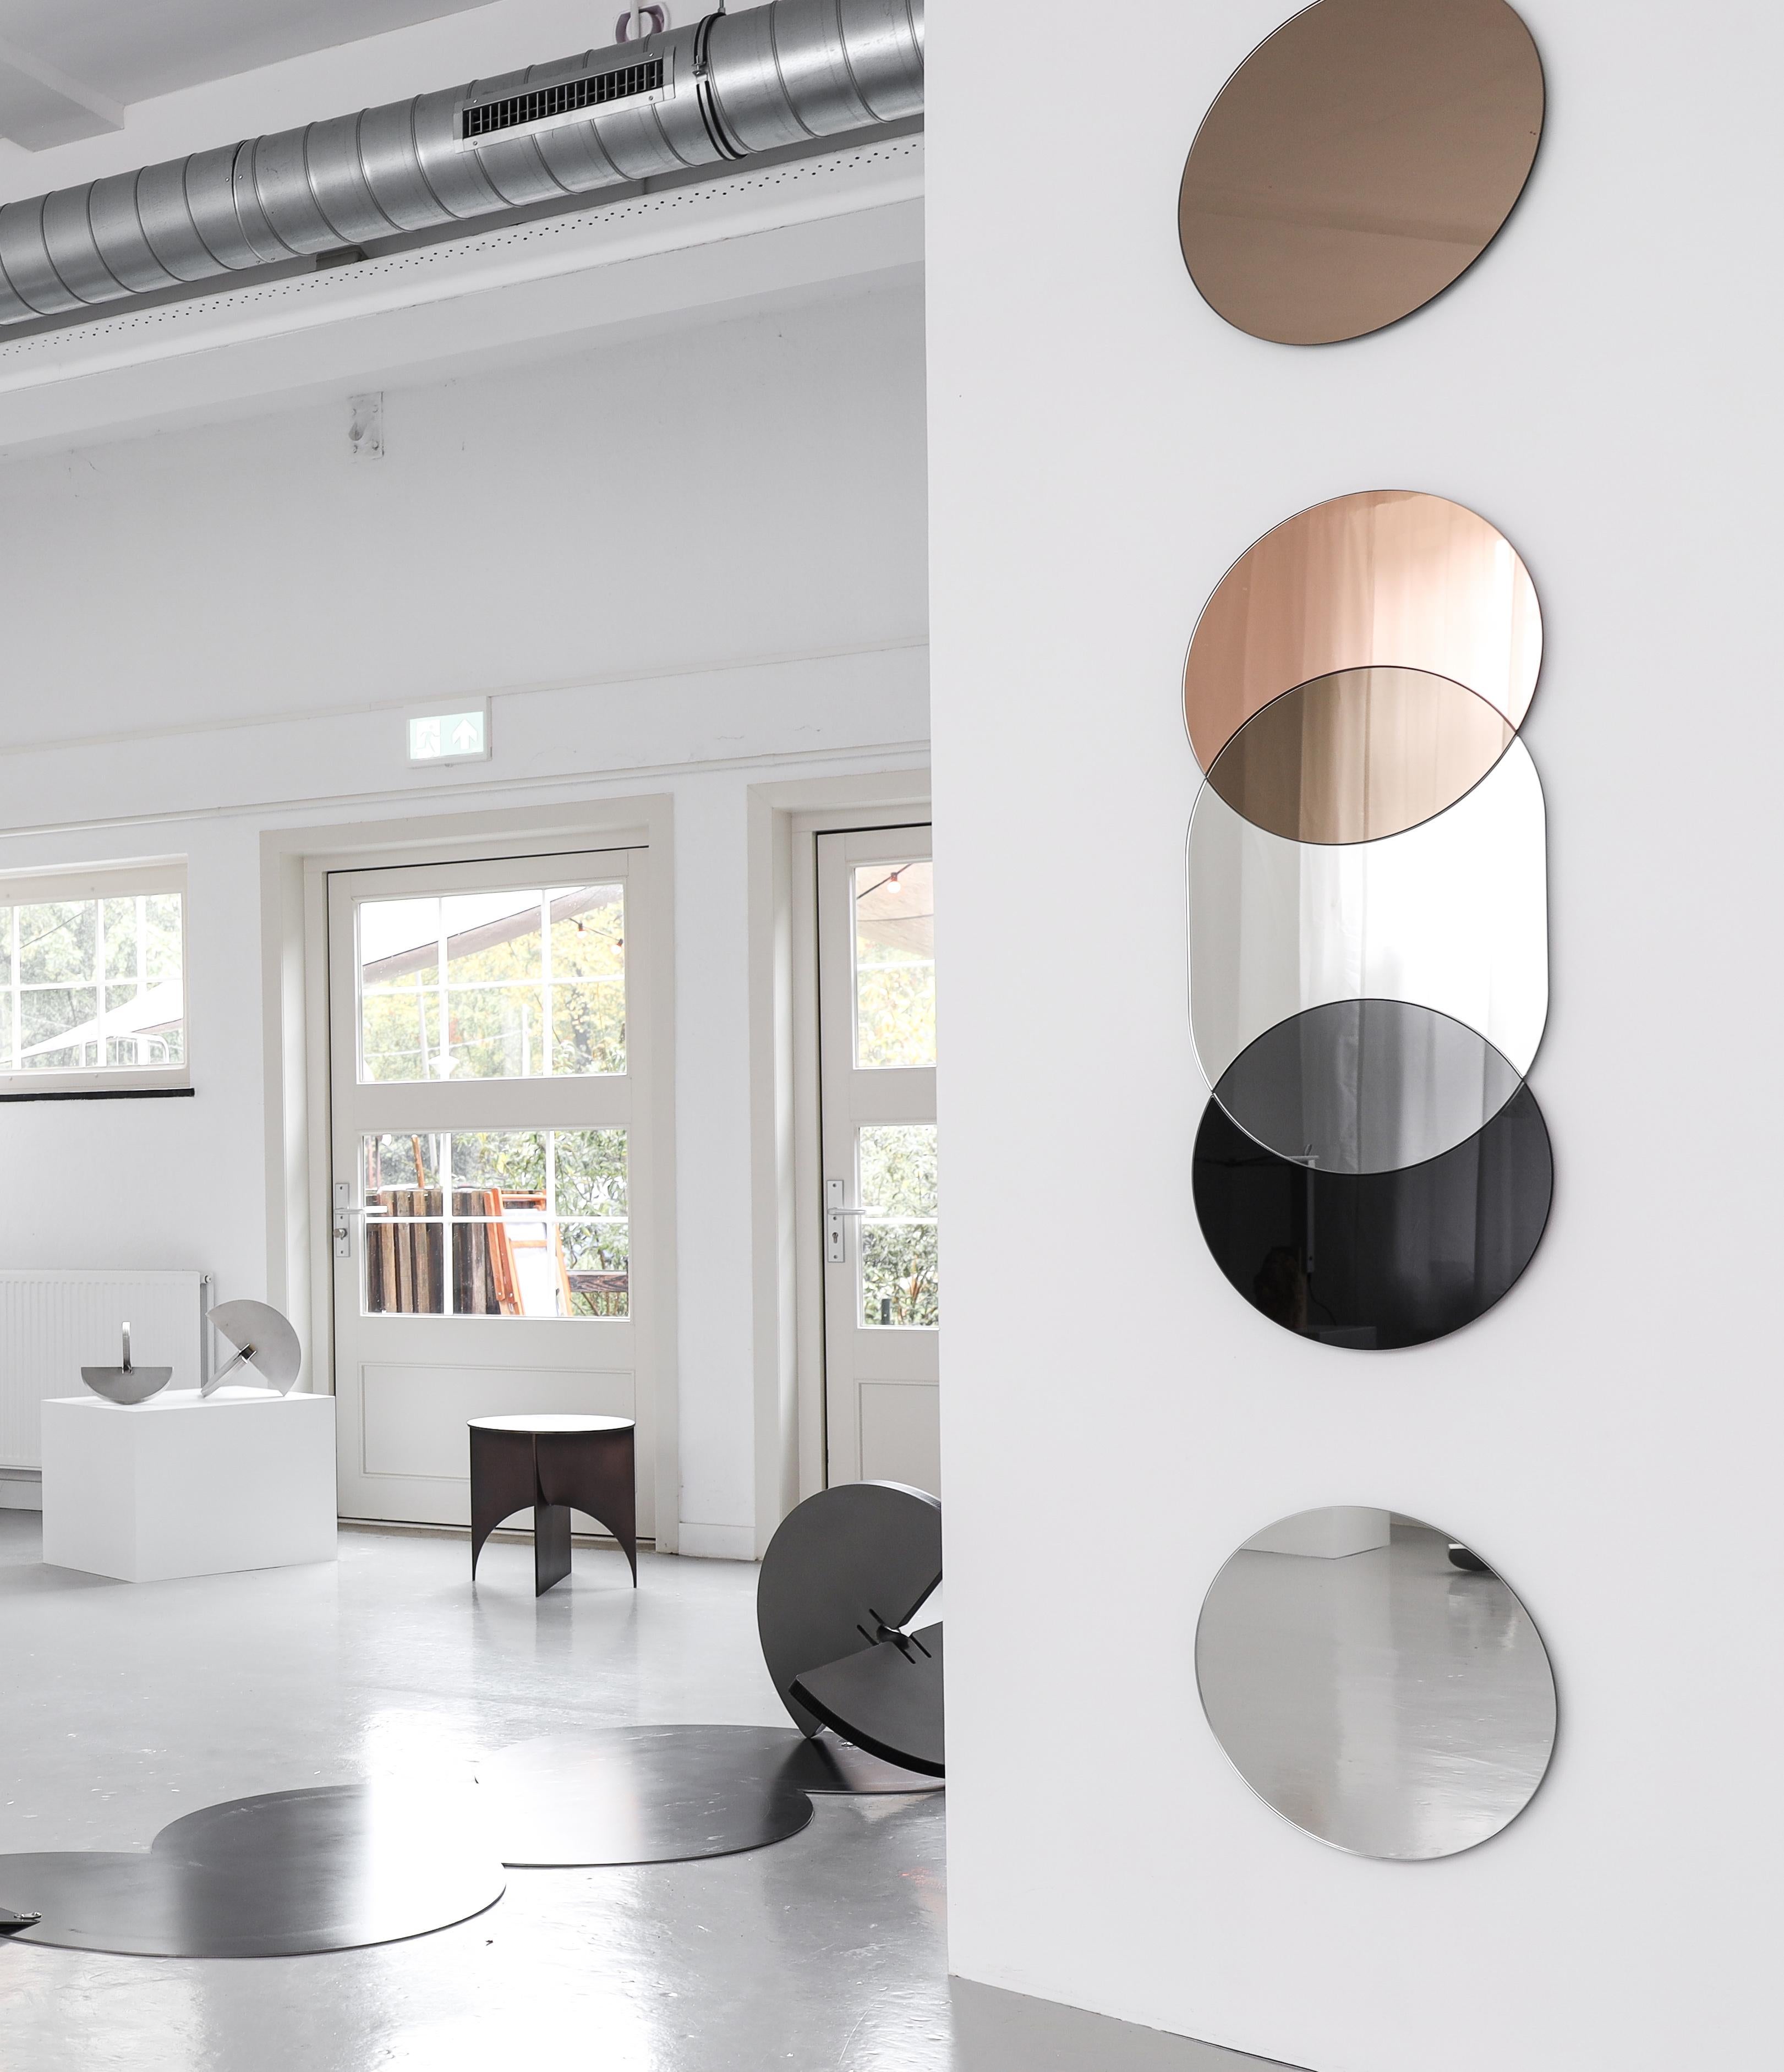 The Layered Silhouettes mirrors are playful reflective compositions that blend functional mirrors with geometric decorative wall objects. The Layered Silhouettes mirrors create the illusion of space and transparency, using chromatic mirrors in